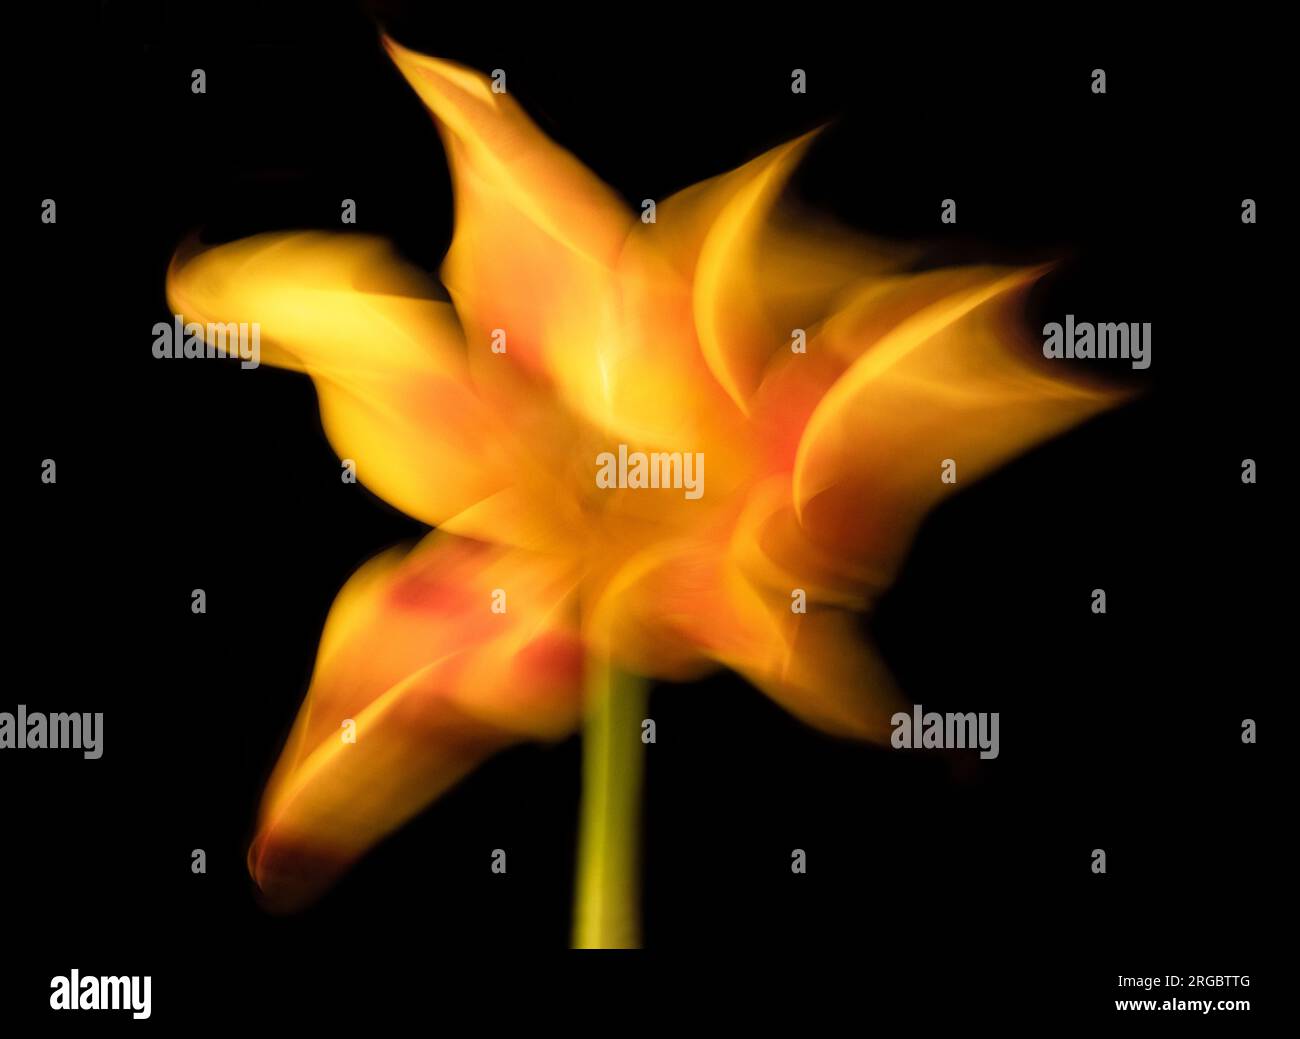 An Intentional Camera Movement photo showing a striking yellow and orange tulip appearing to dance against a clear black background. Stock Photo